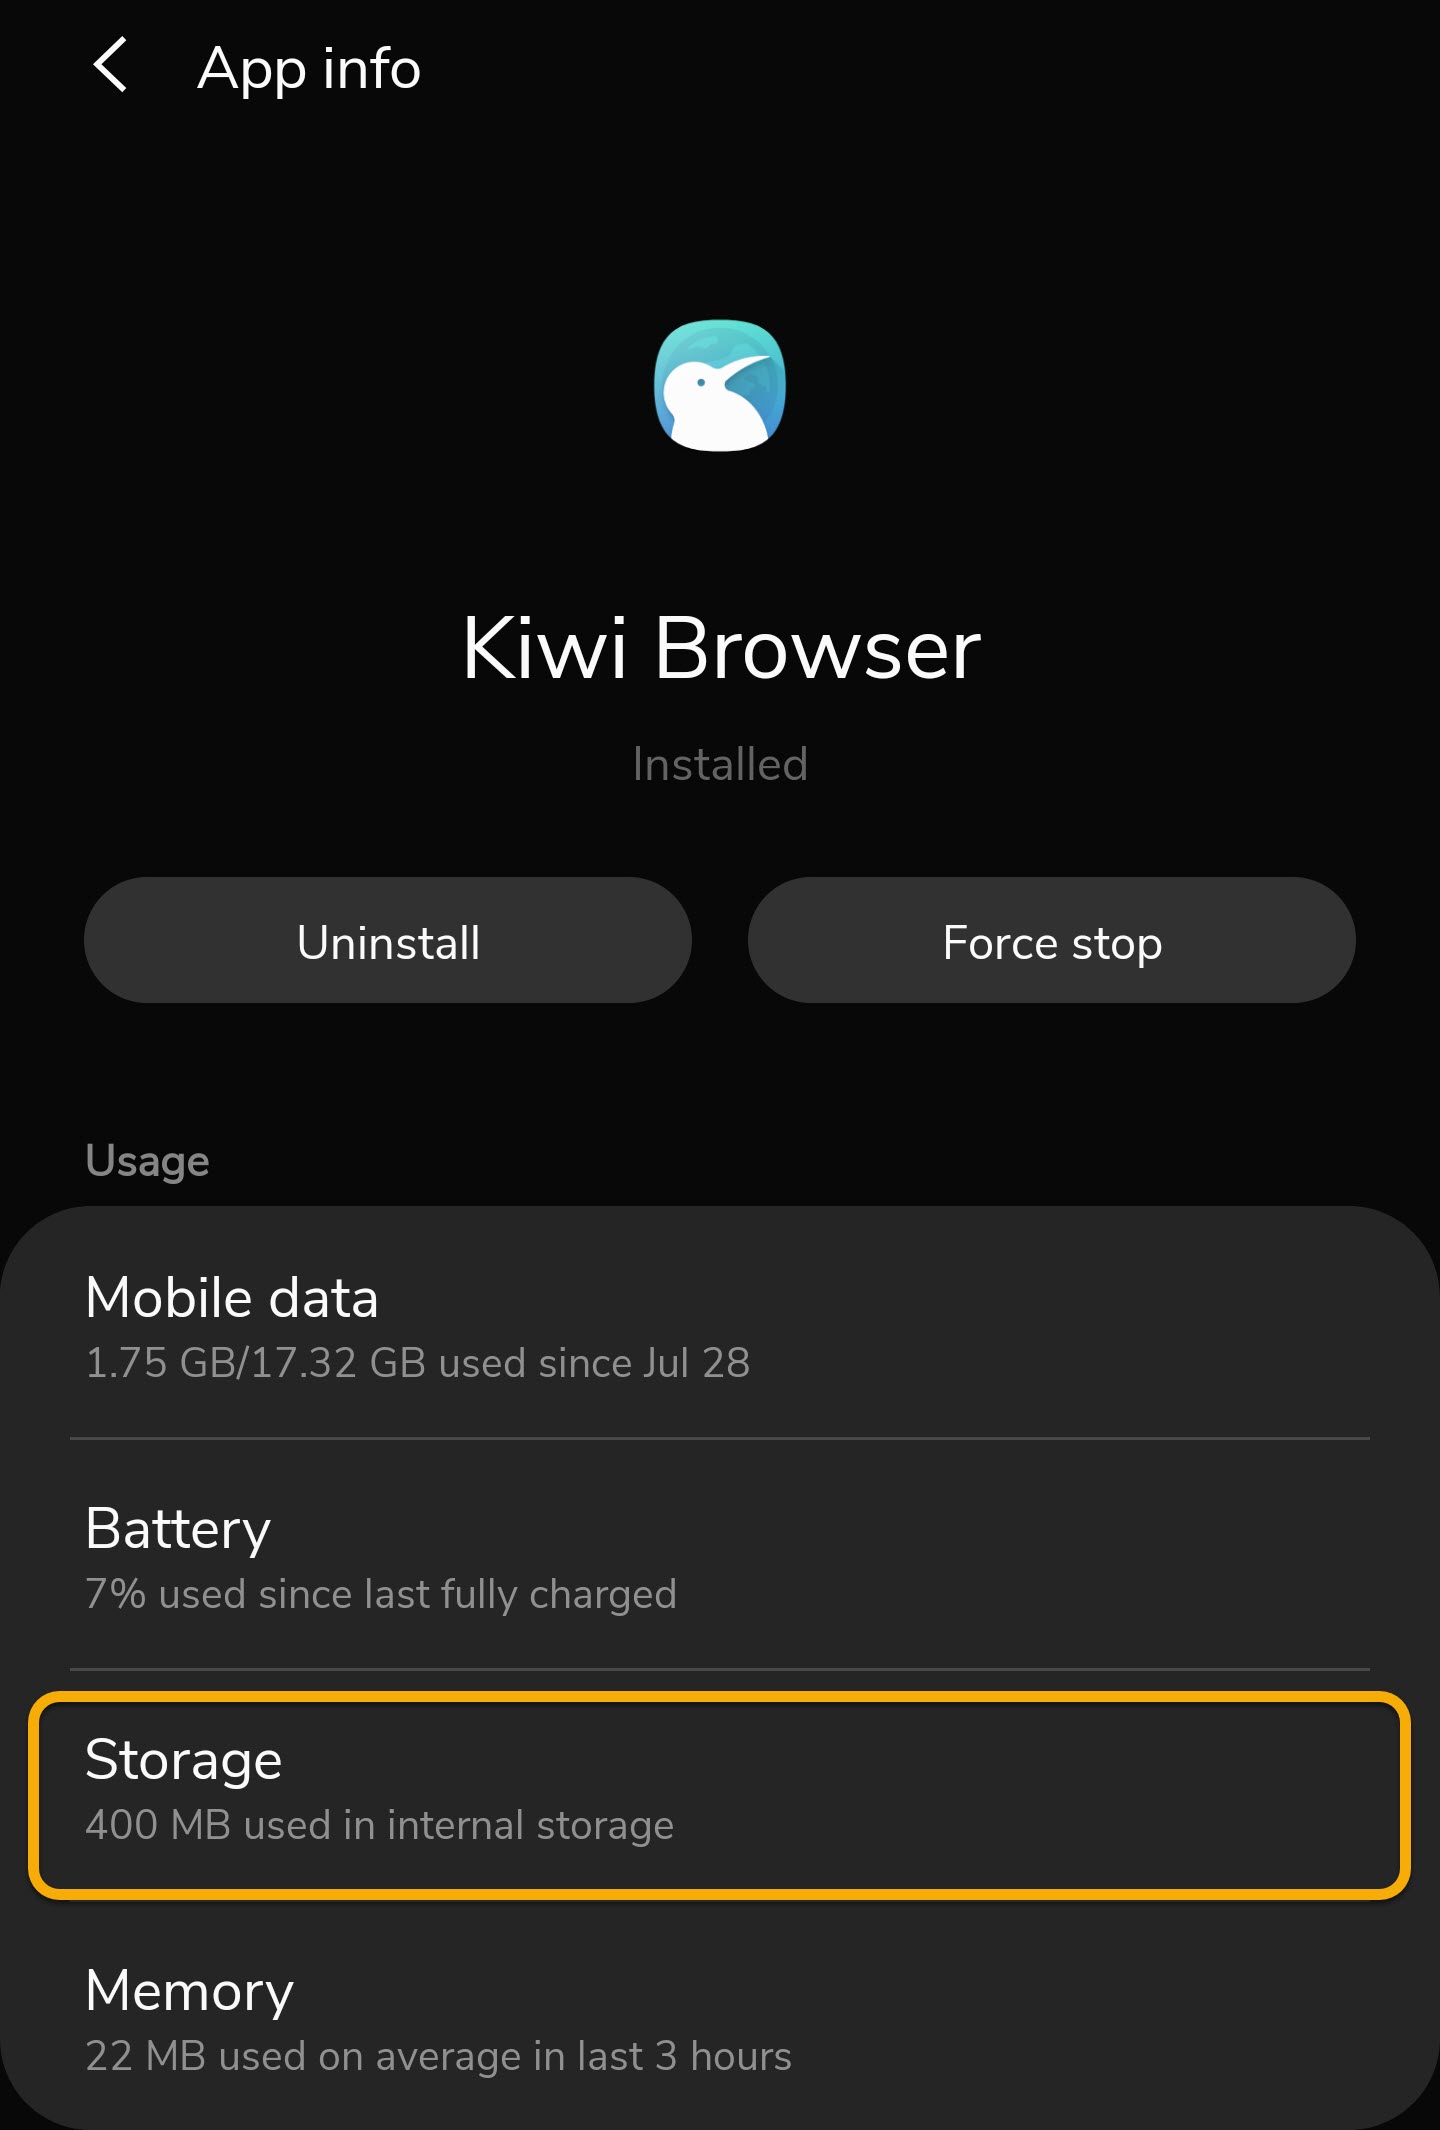 How to Clear Android Cache